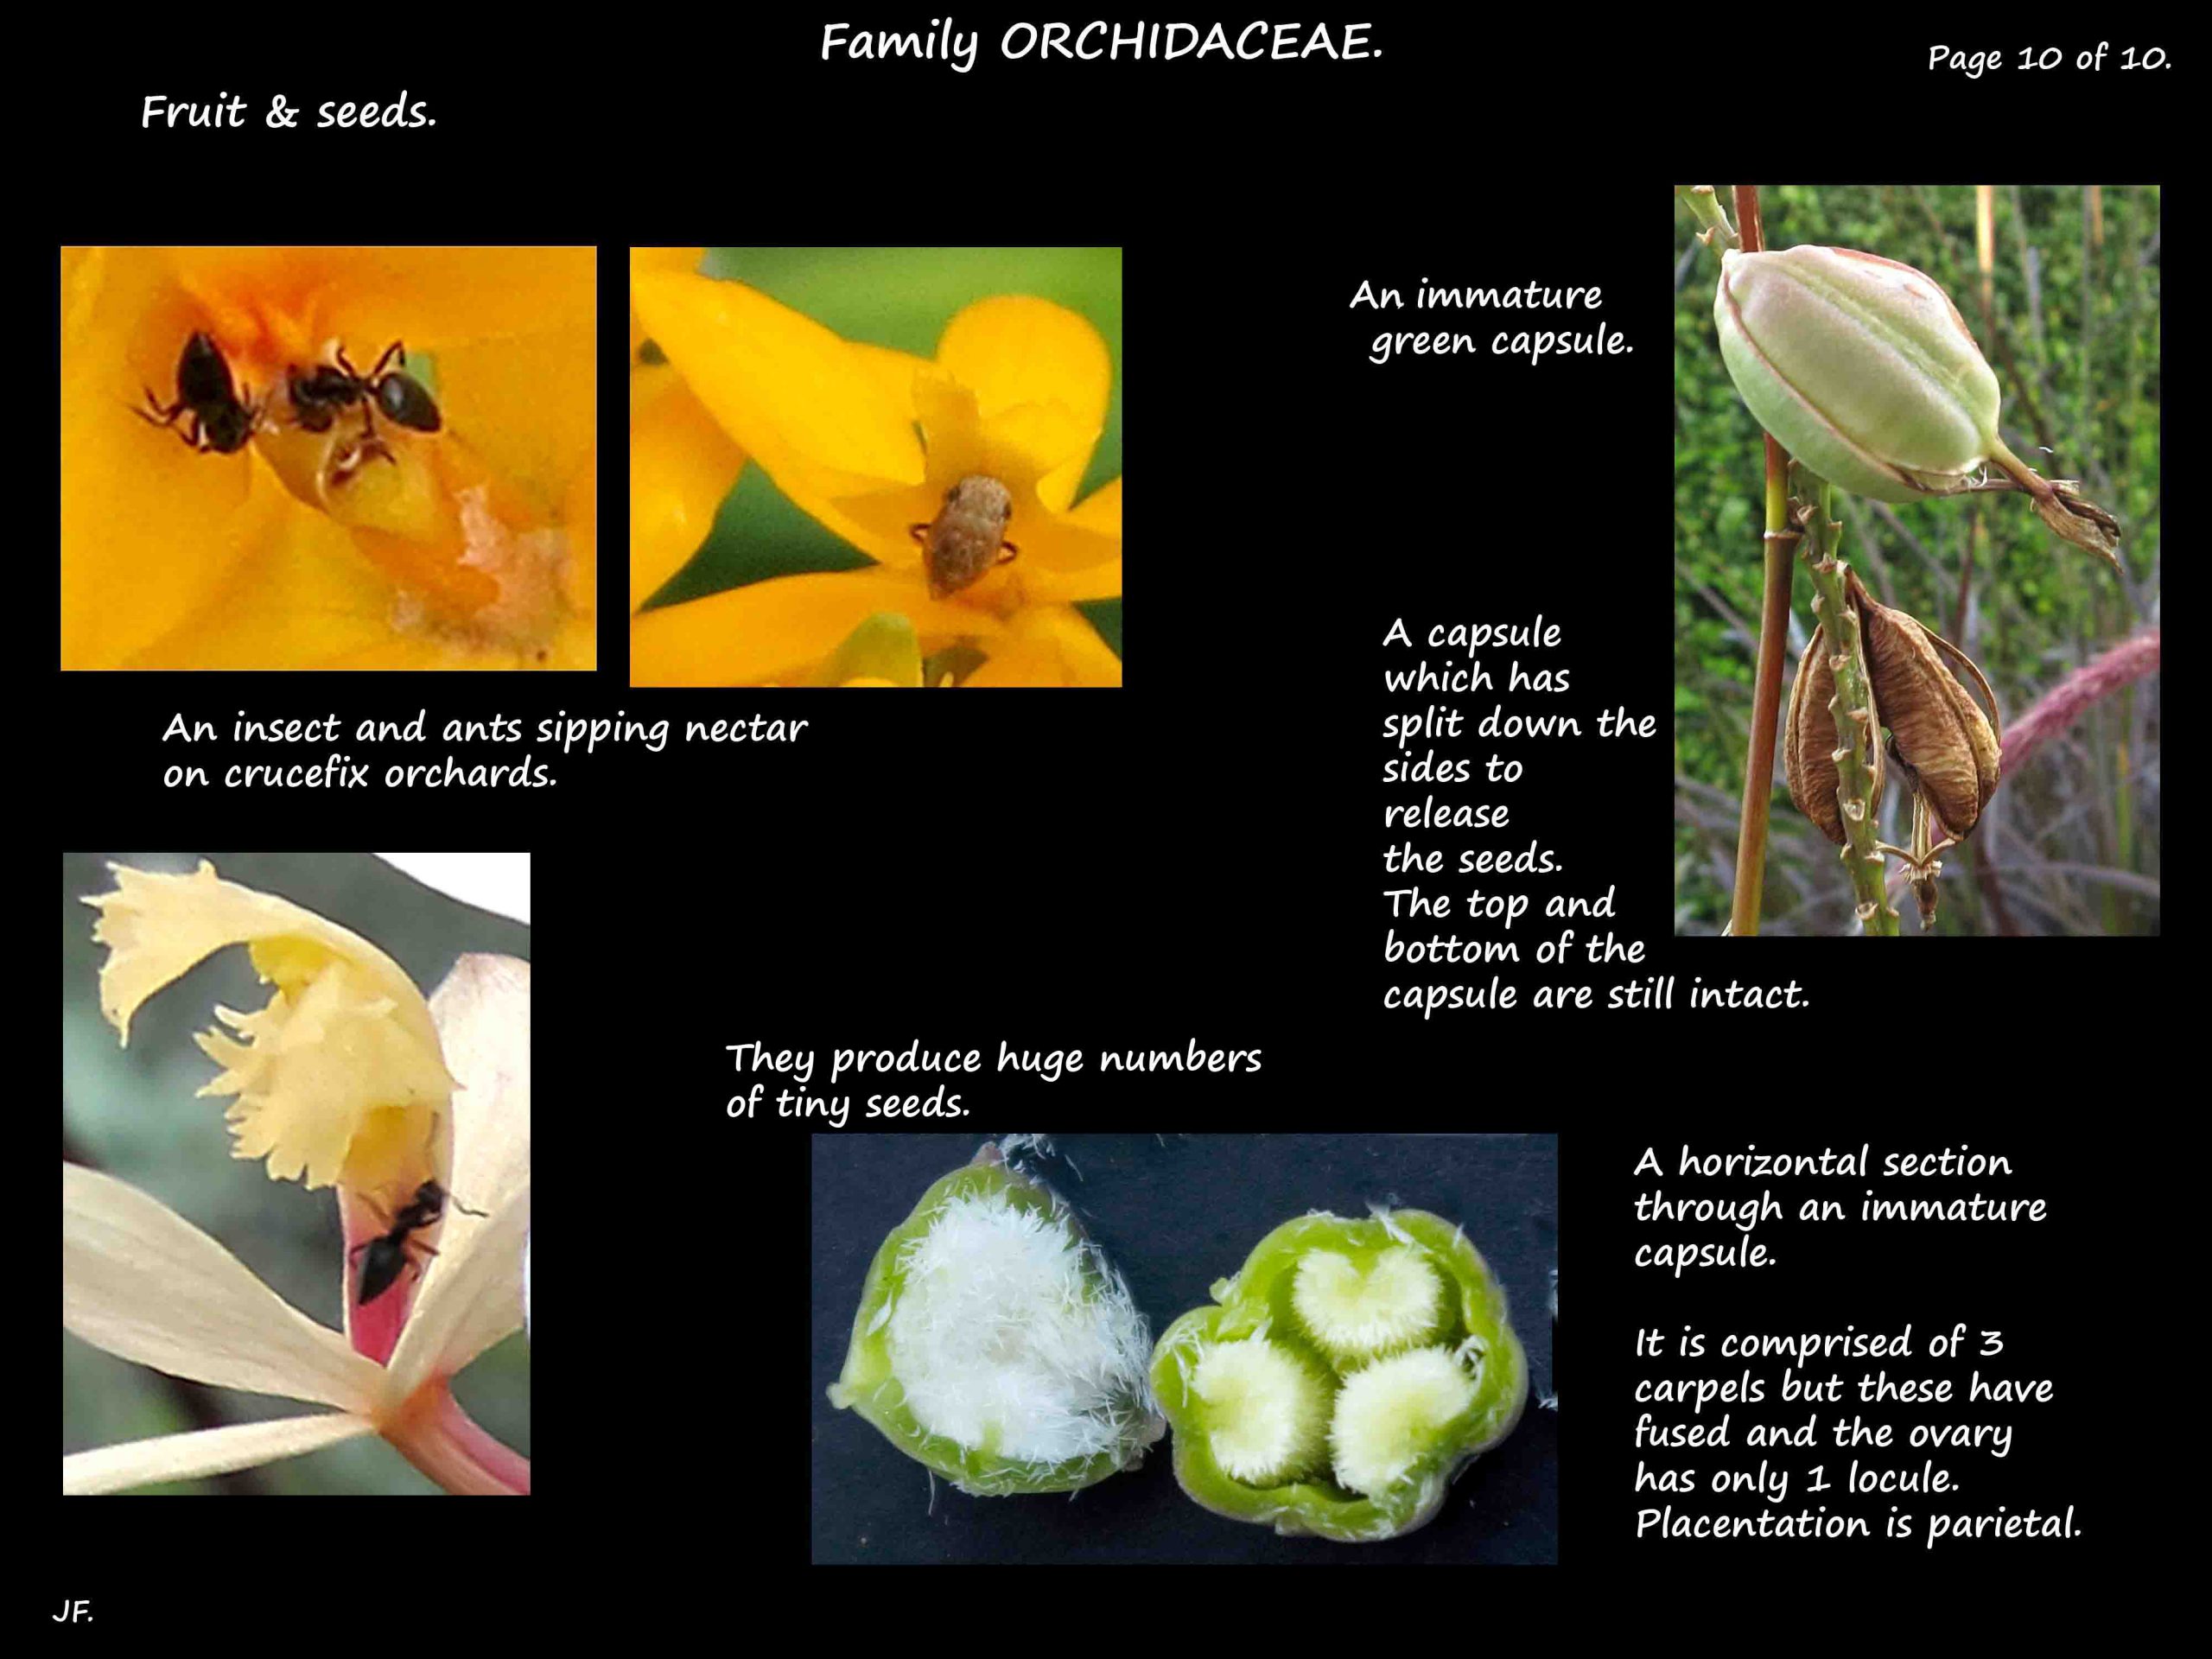 10 Orchid fruit & seeds